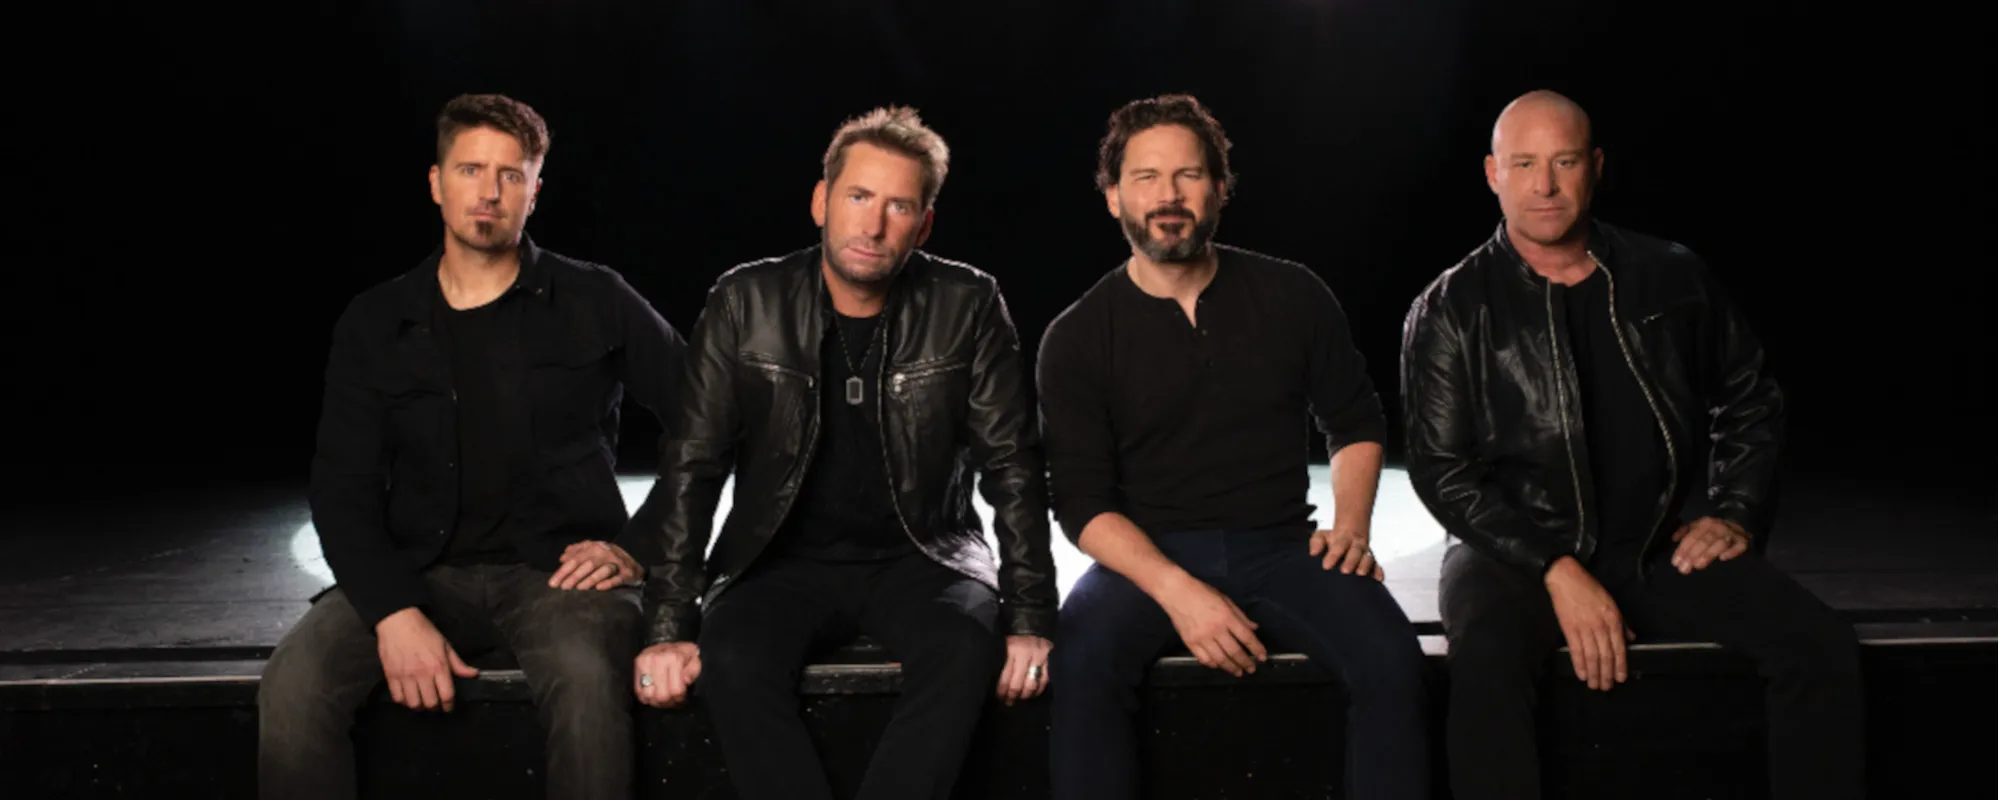 Nickelback Showcases Eclectic Roots on New LP ‘Get Rollin”